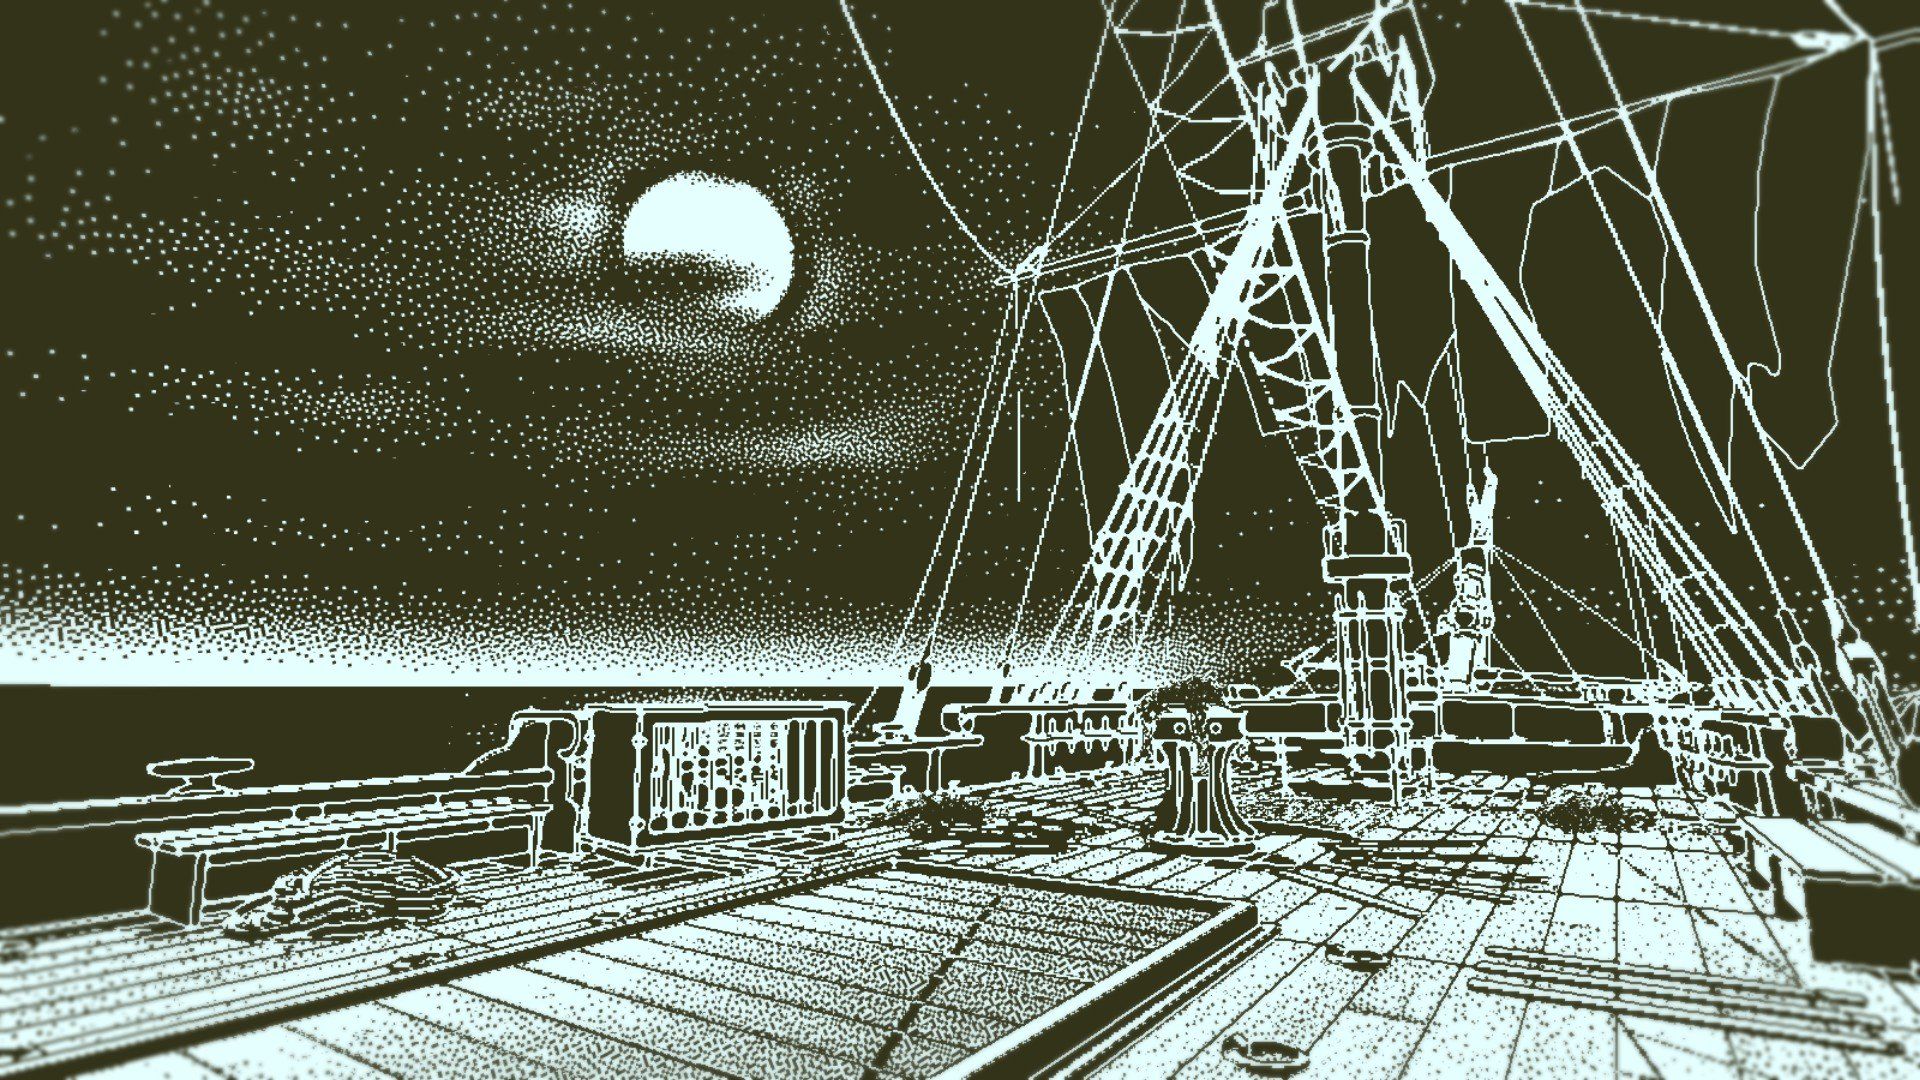 Return Of The Obra Dinn Is Better With A Real Notebook